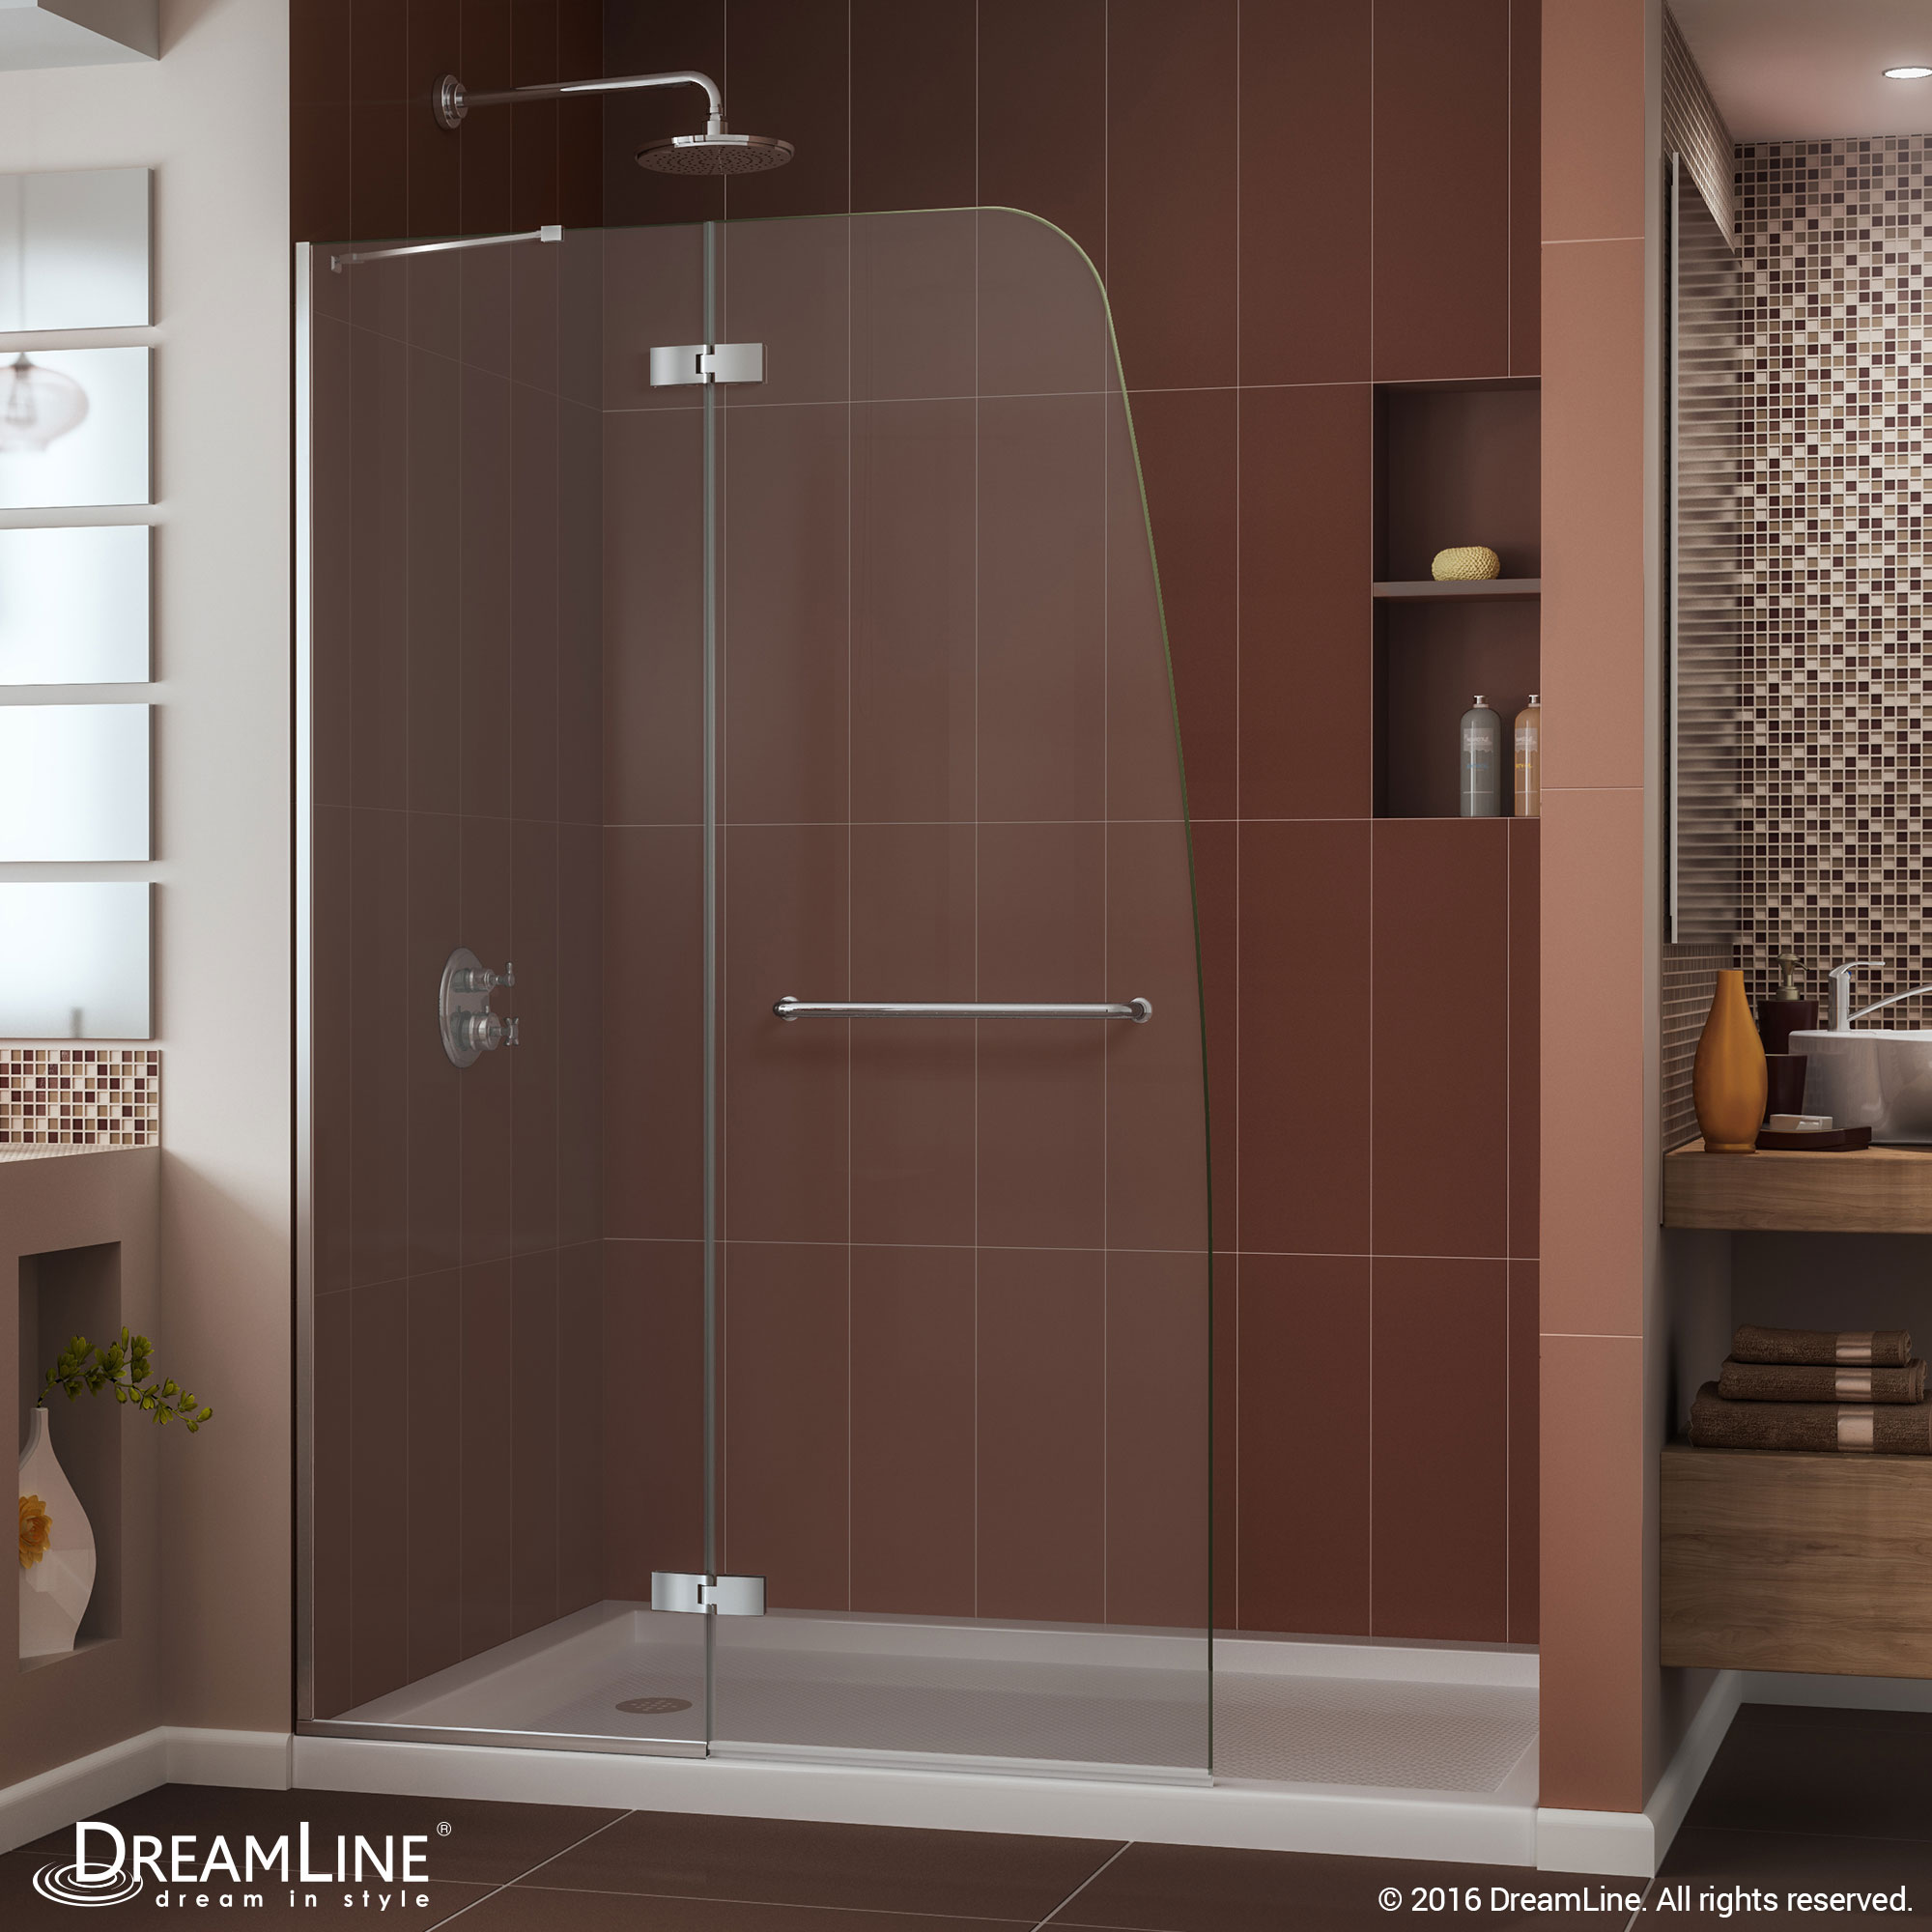 DreamLine Aqua Ultra 34 in. D x 60 in. W x 74 3/4 in. H Frameless Shower Door in Brushed Nickel and Left Drain Biscuit Base Kit